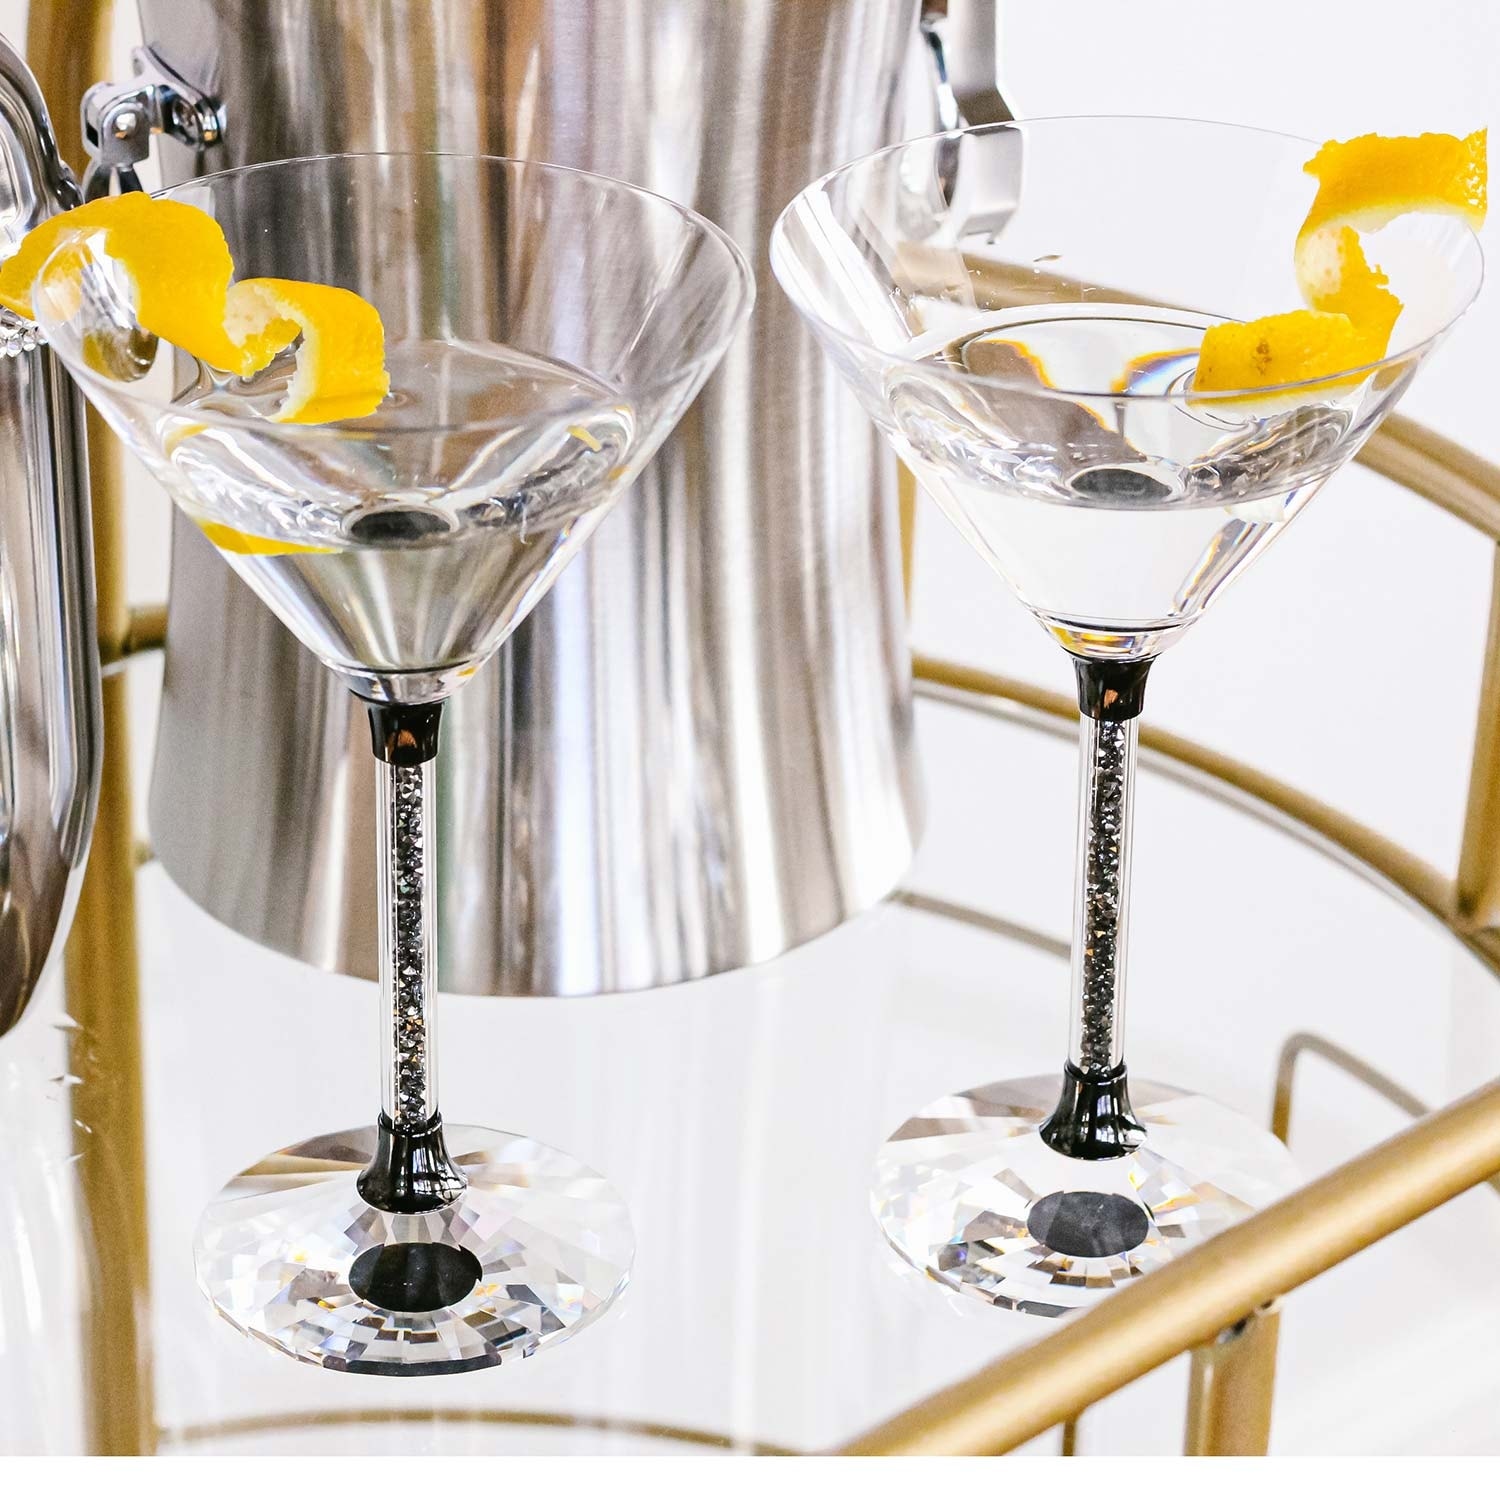 https://ak1.ostkcdn.com/images/products/is/images/direct/9ca2fc7301948418bda81765fd90569461e67aa6/Sparkles-Home-Rhinestone-Martini-Glasses-with-Crystal-Filled-Stems.jpg